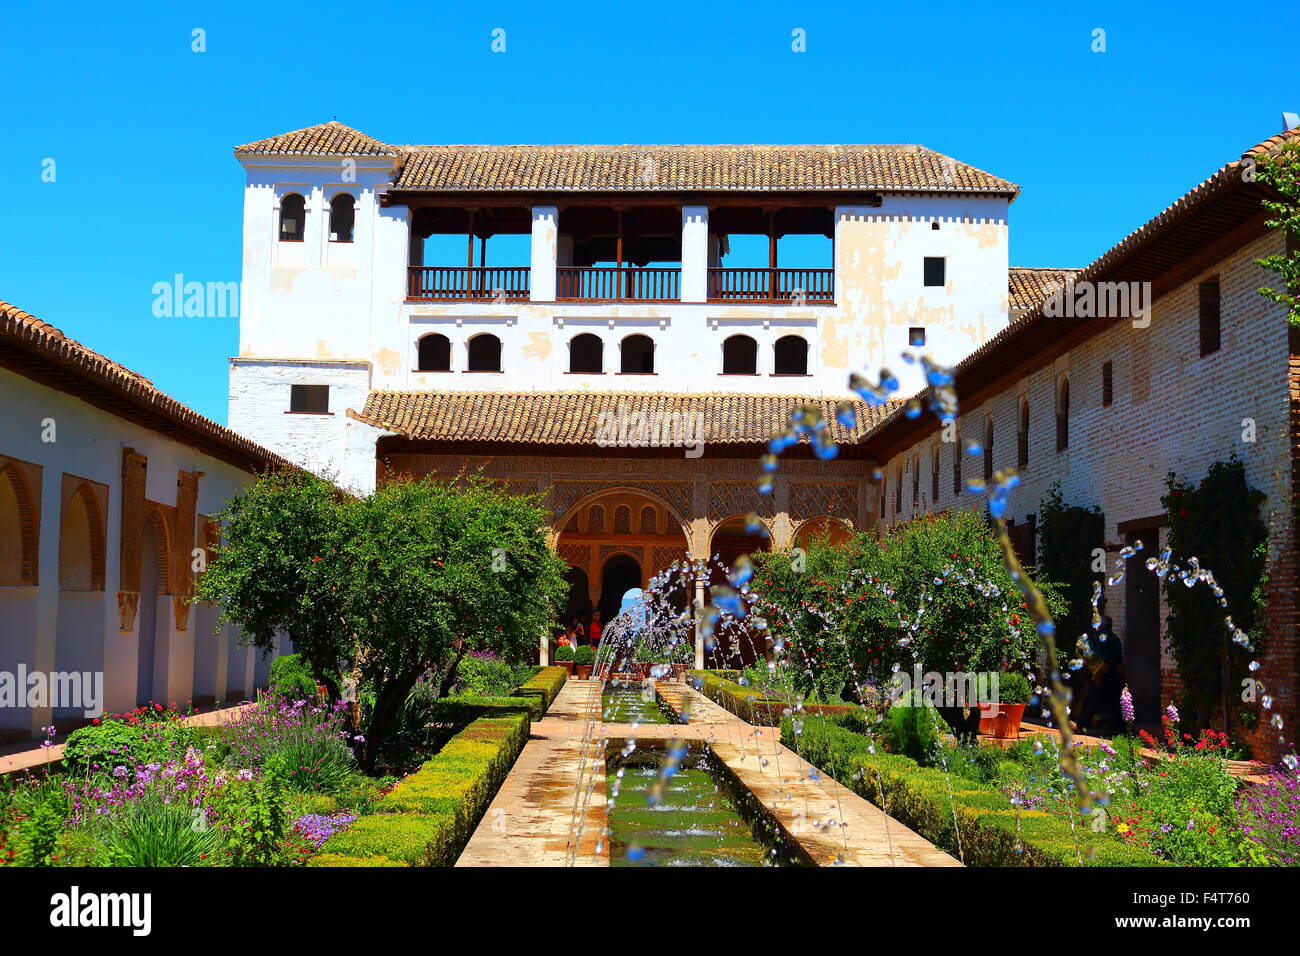 The Water Channel Court, and fountain is the most important part of the Generalife, La Alhambra. Stock Photo